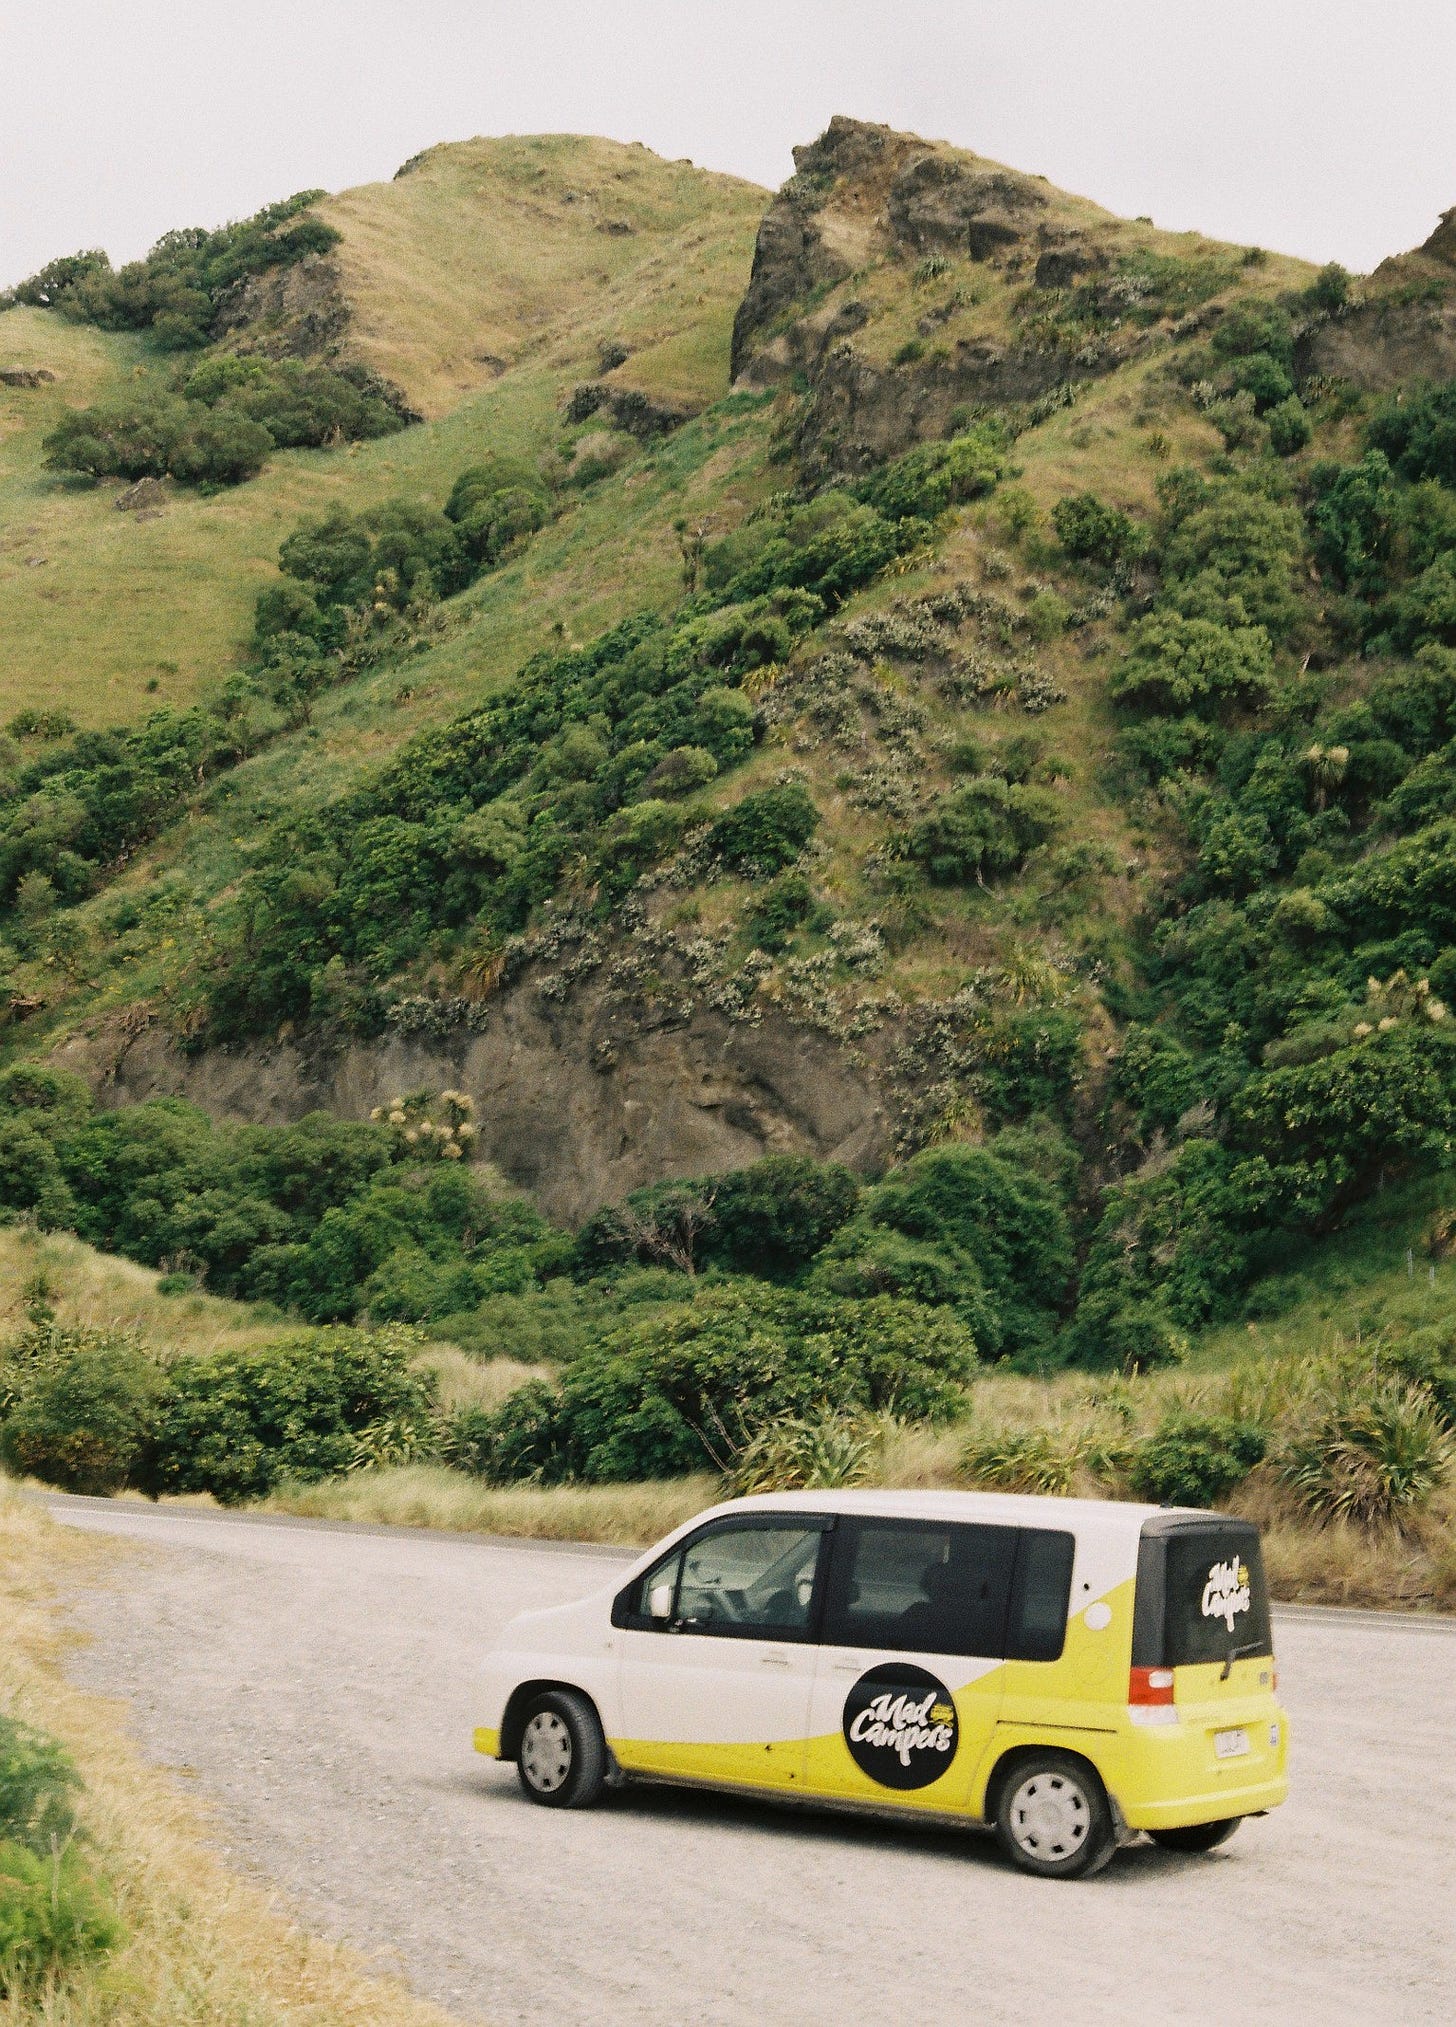 A small yellow and white camper van is parked beside a road and behind it, you can see a green hill